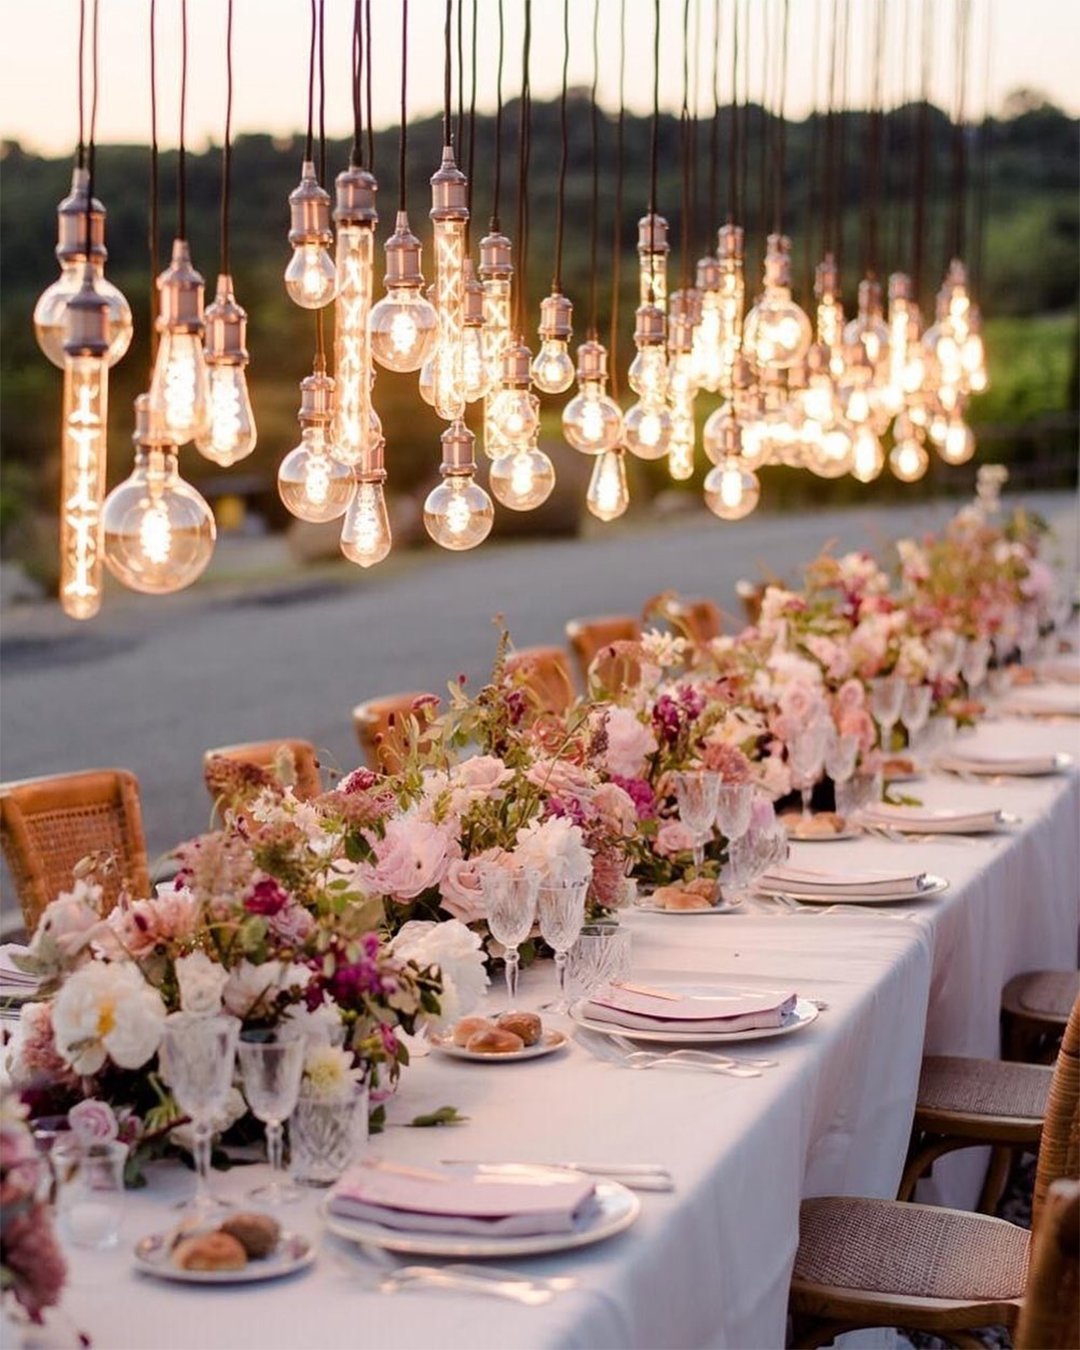 wedding reception space decor in the style of minimalism